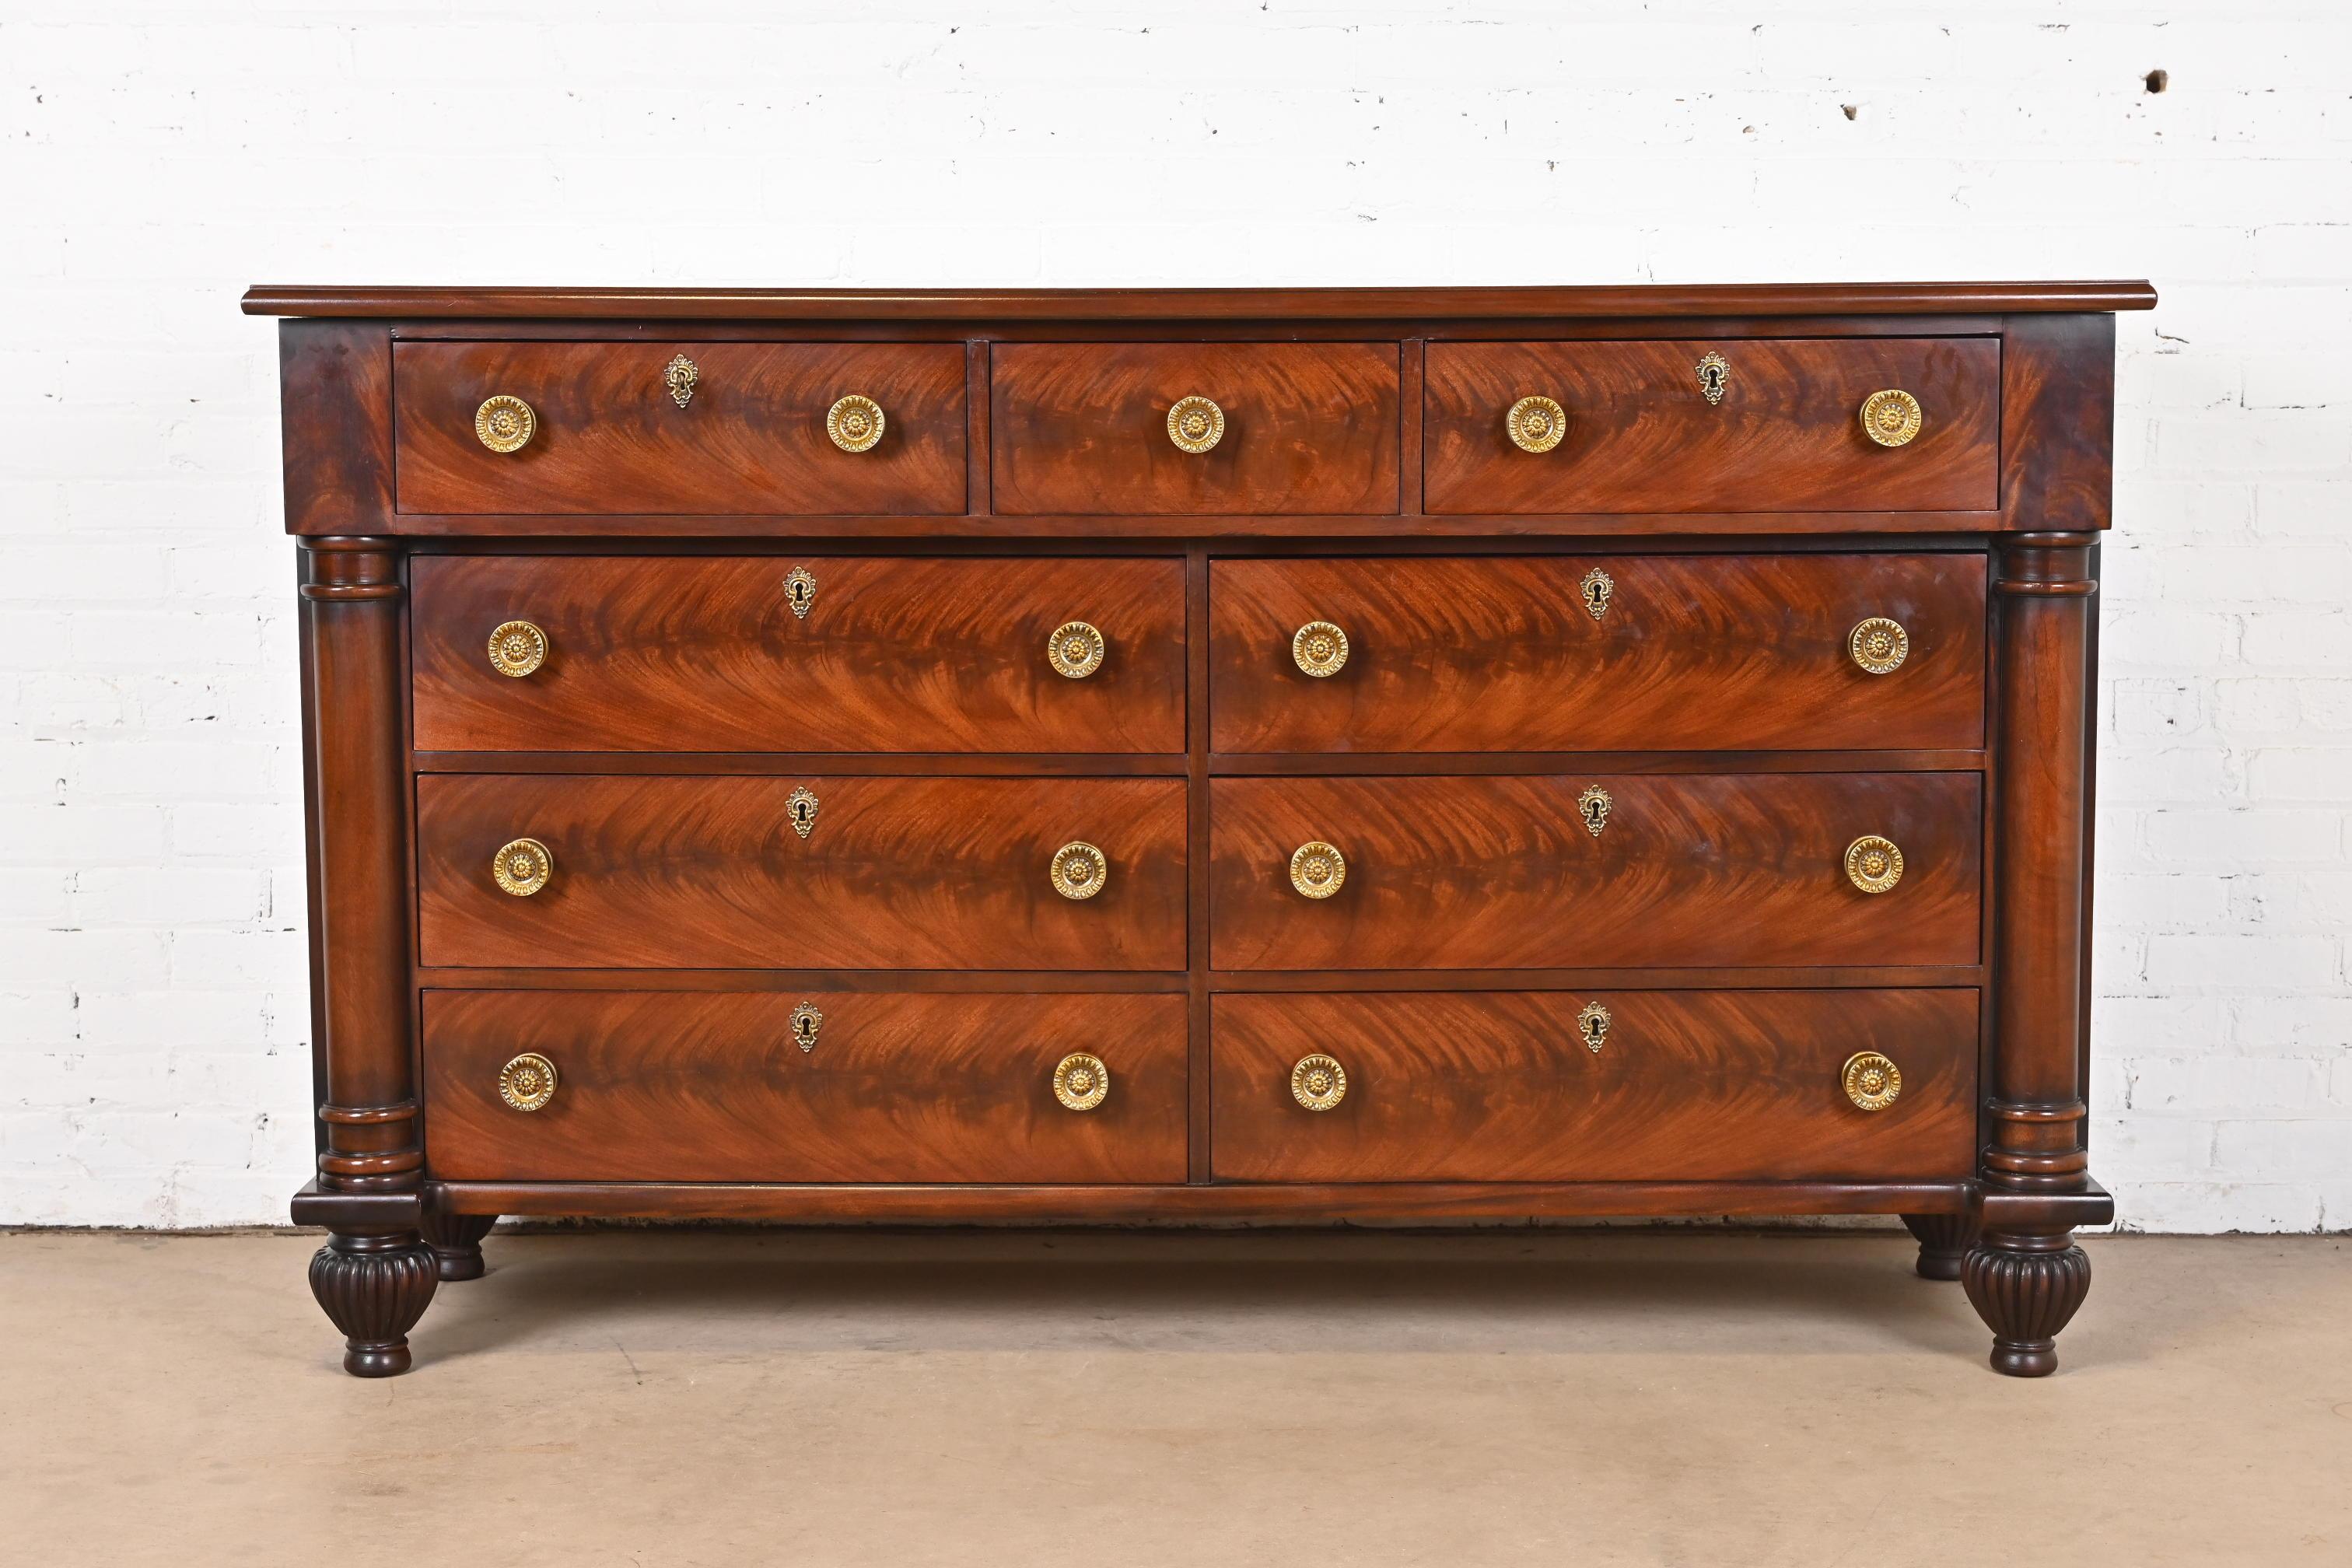 A gorgeous French Empire, Neoclassical, or Georgian style nine-drawer dresser or chest of drawers

In the manner of Ralph Lauren

By Henredon

USA, Late 20th Century

Beautiful book-matched flame mahogany, with carved mahogany columns and original